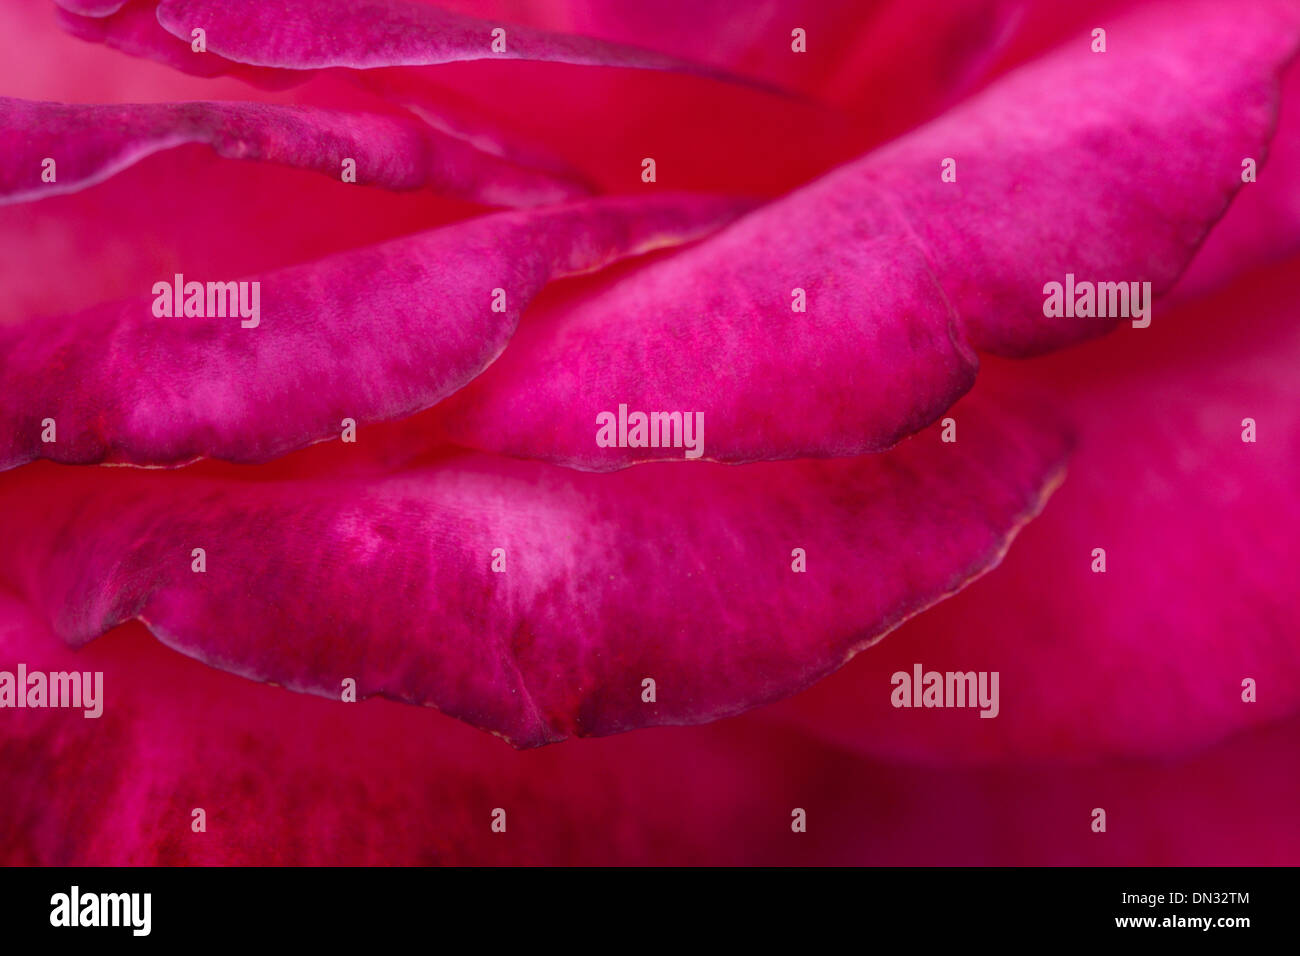 close up of red rose petals pink colorful Stock Photo